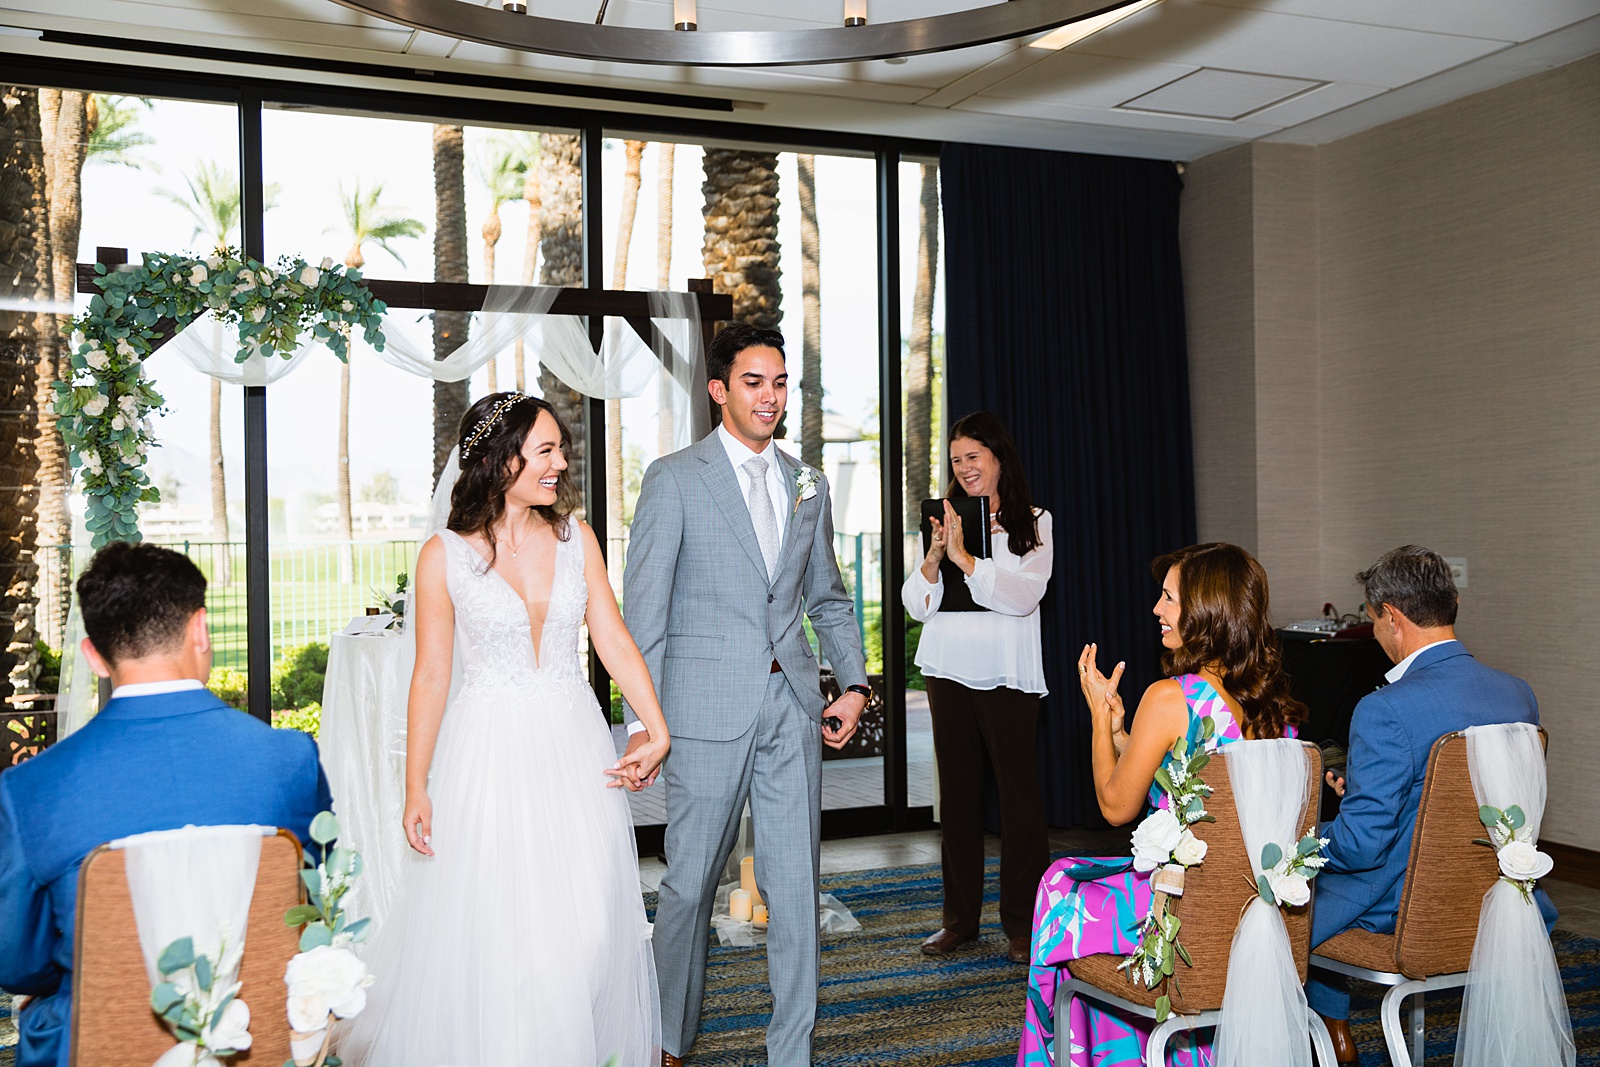 Bride and groom walking down the aisle together as newlyweds by PMA Photography.